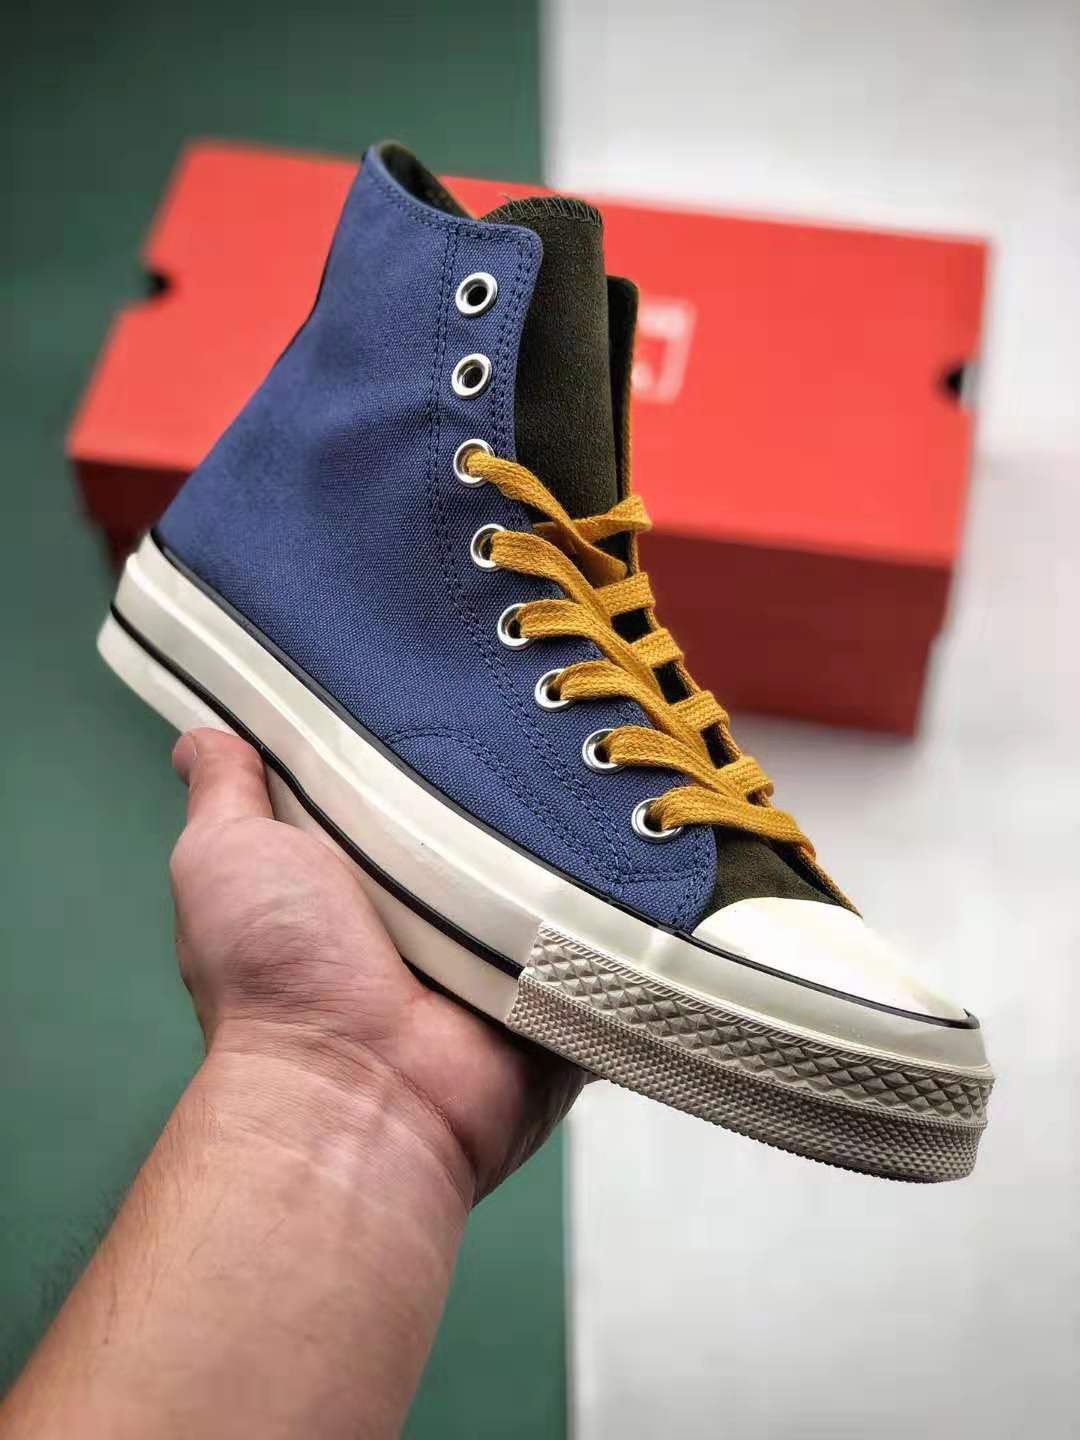 Converse Chuck Taylor 1970s 165645C: Classic Sneakers with Retro Style